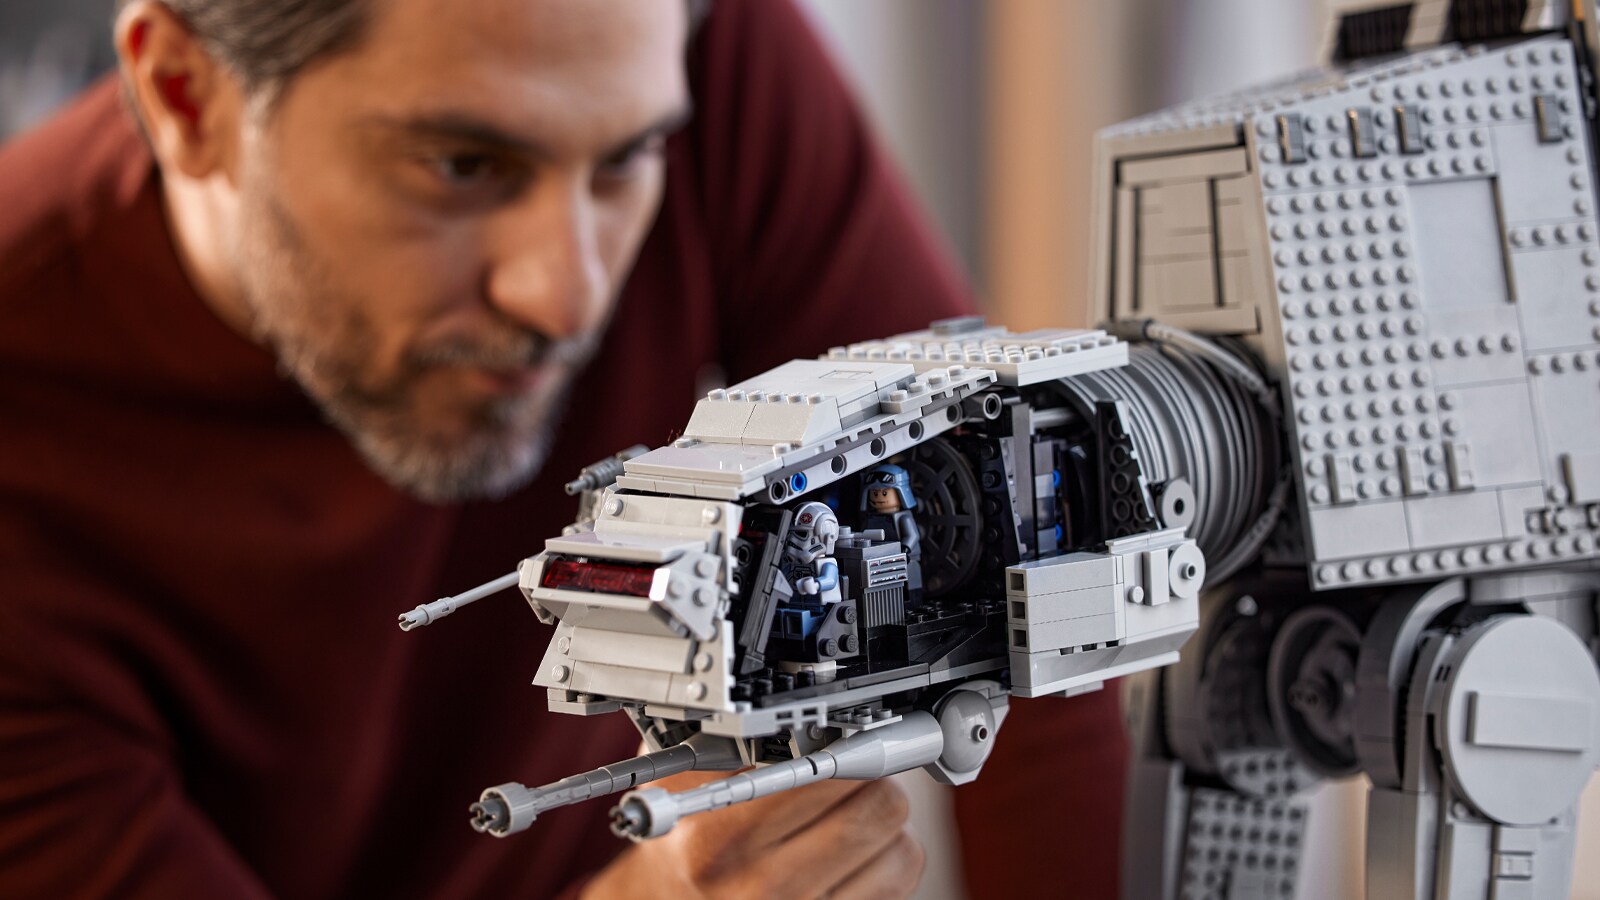 10 Great LEGO Star Wars Building Sets for Adults